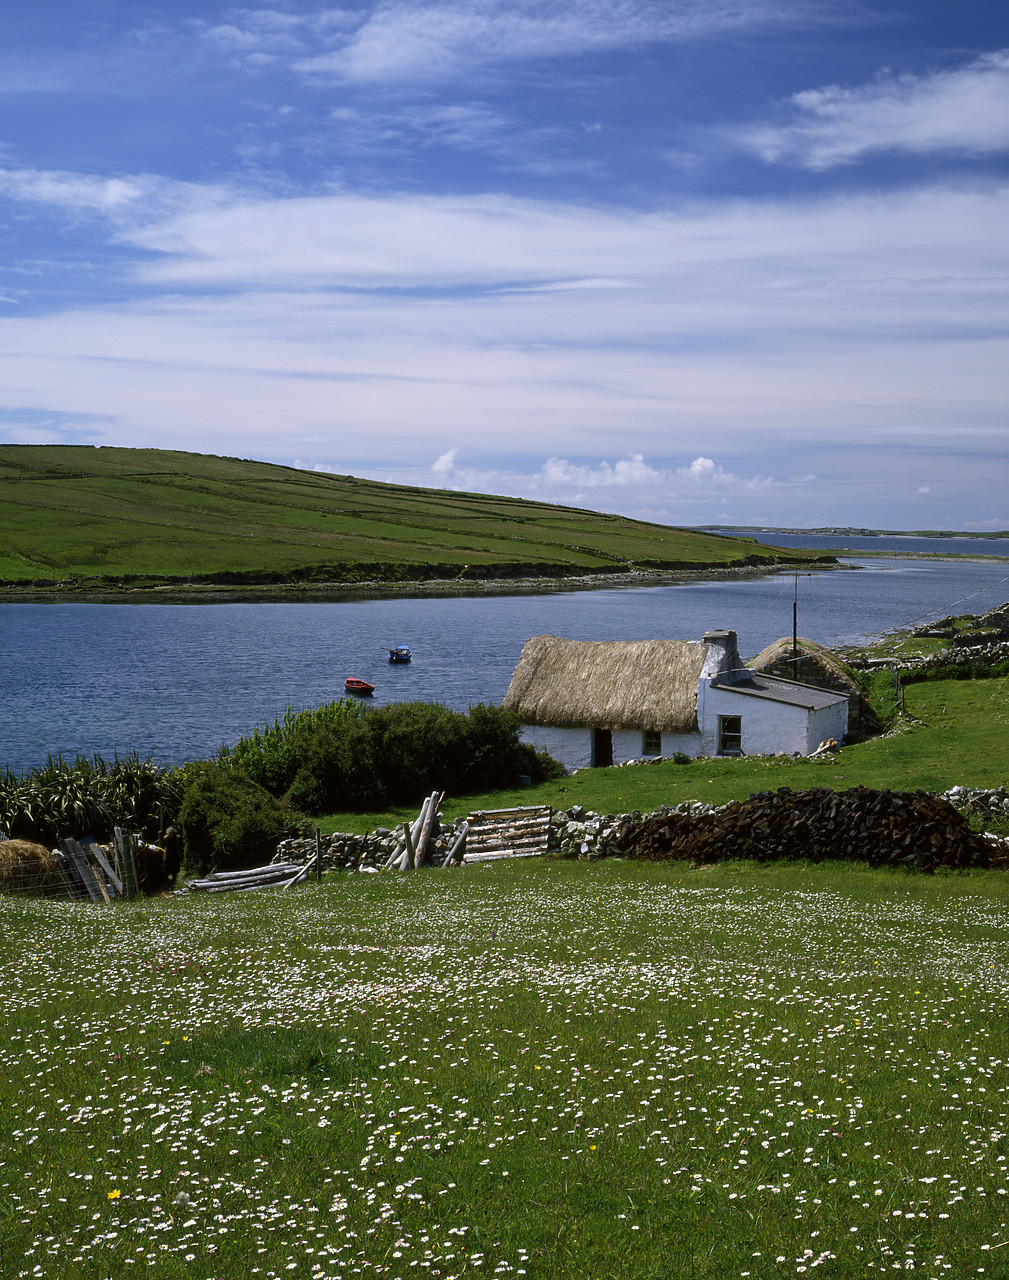 #955390-6 - Thatched Cottage looking over Clifden Bay, Connemara, Co. Galway, Ireland